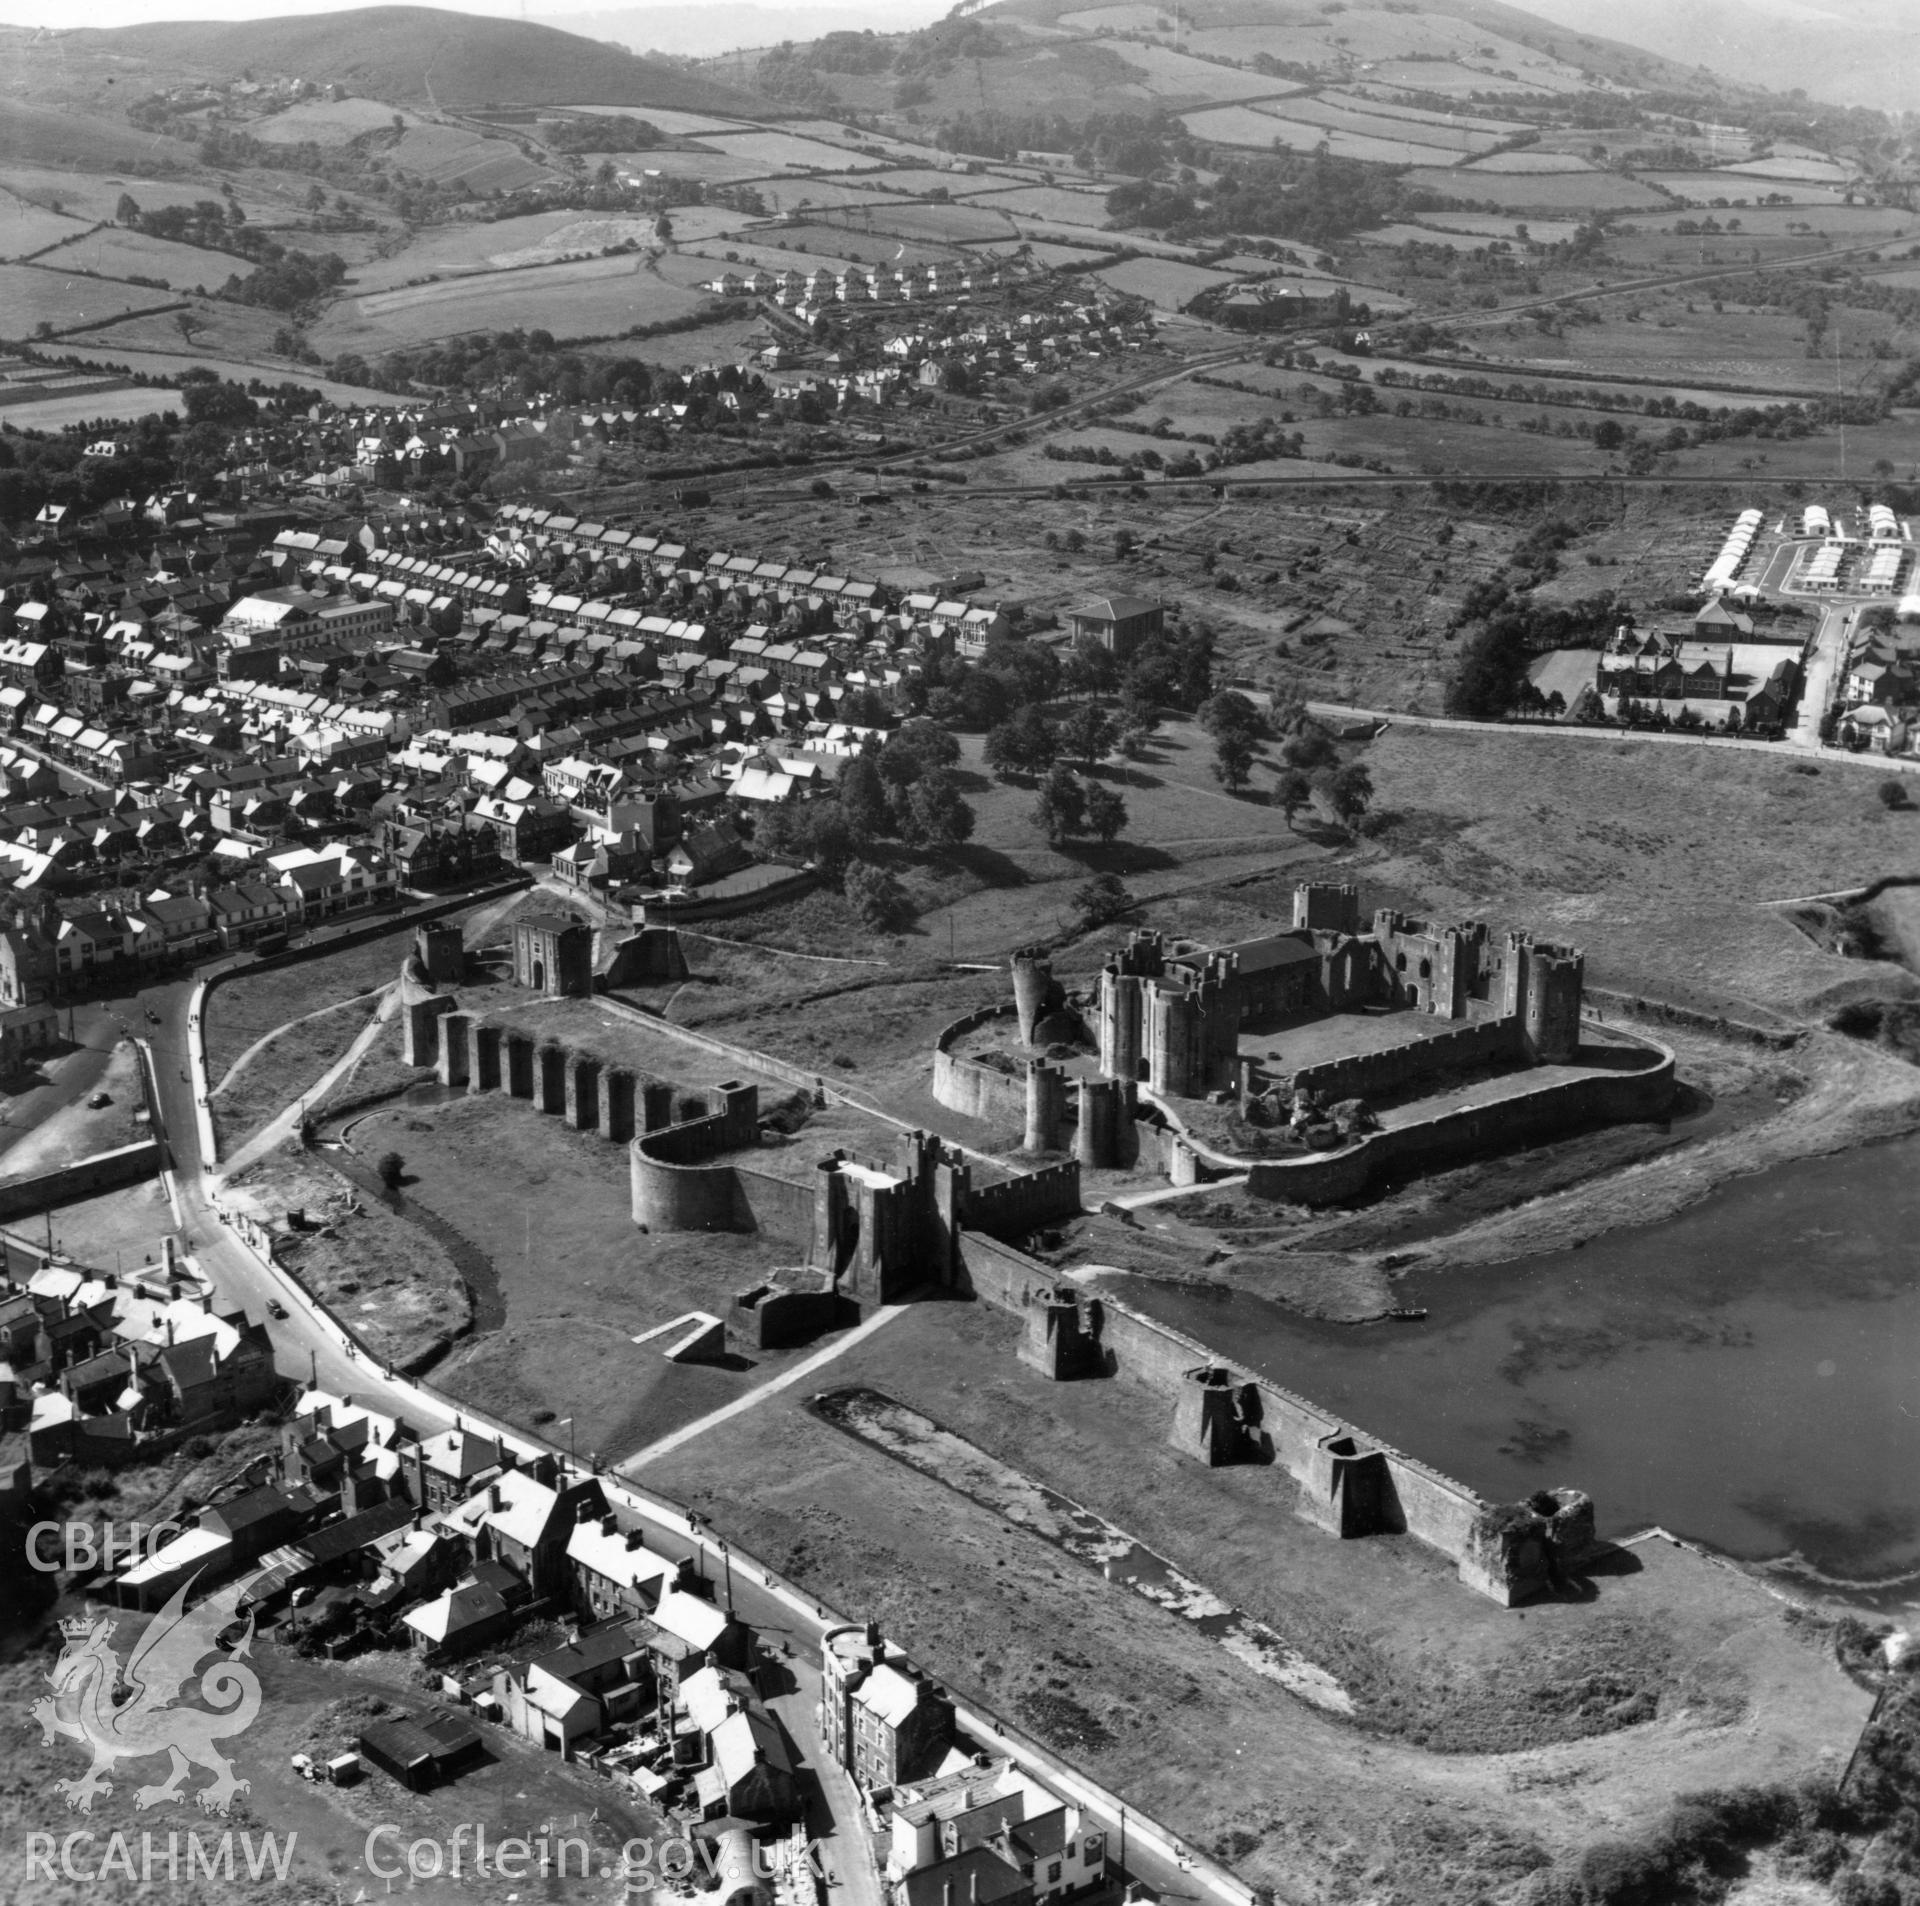 View of Caerphilly showing castle and housing estates. Oblique aerial photograph, 5?" cut roll film.